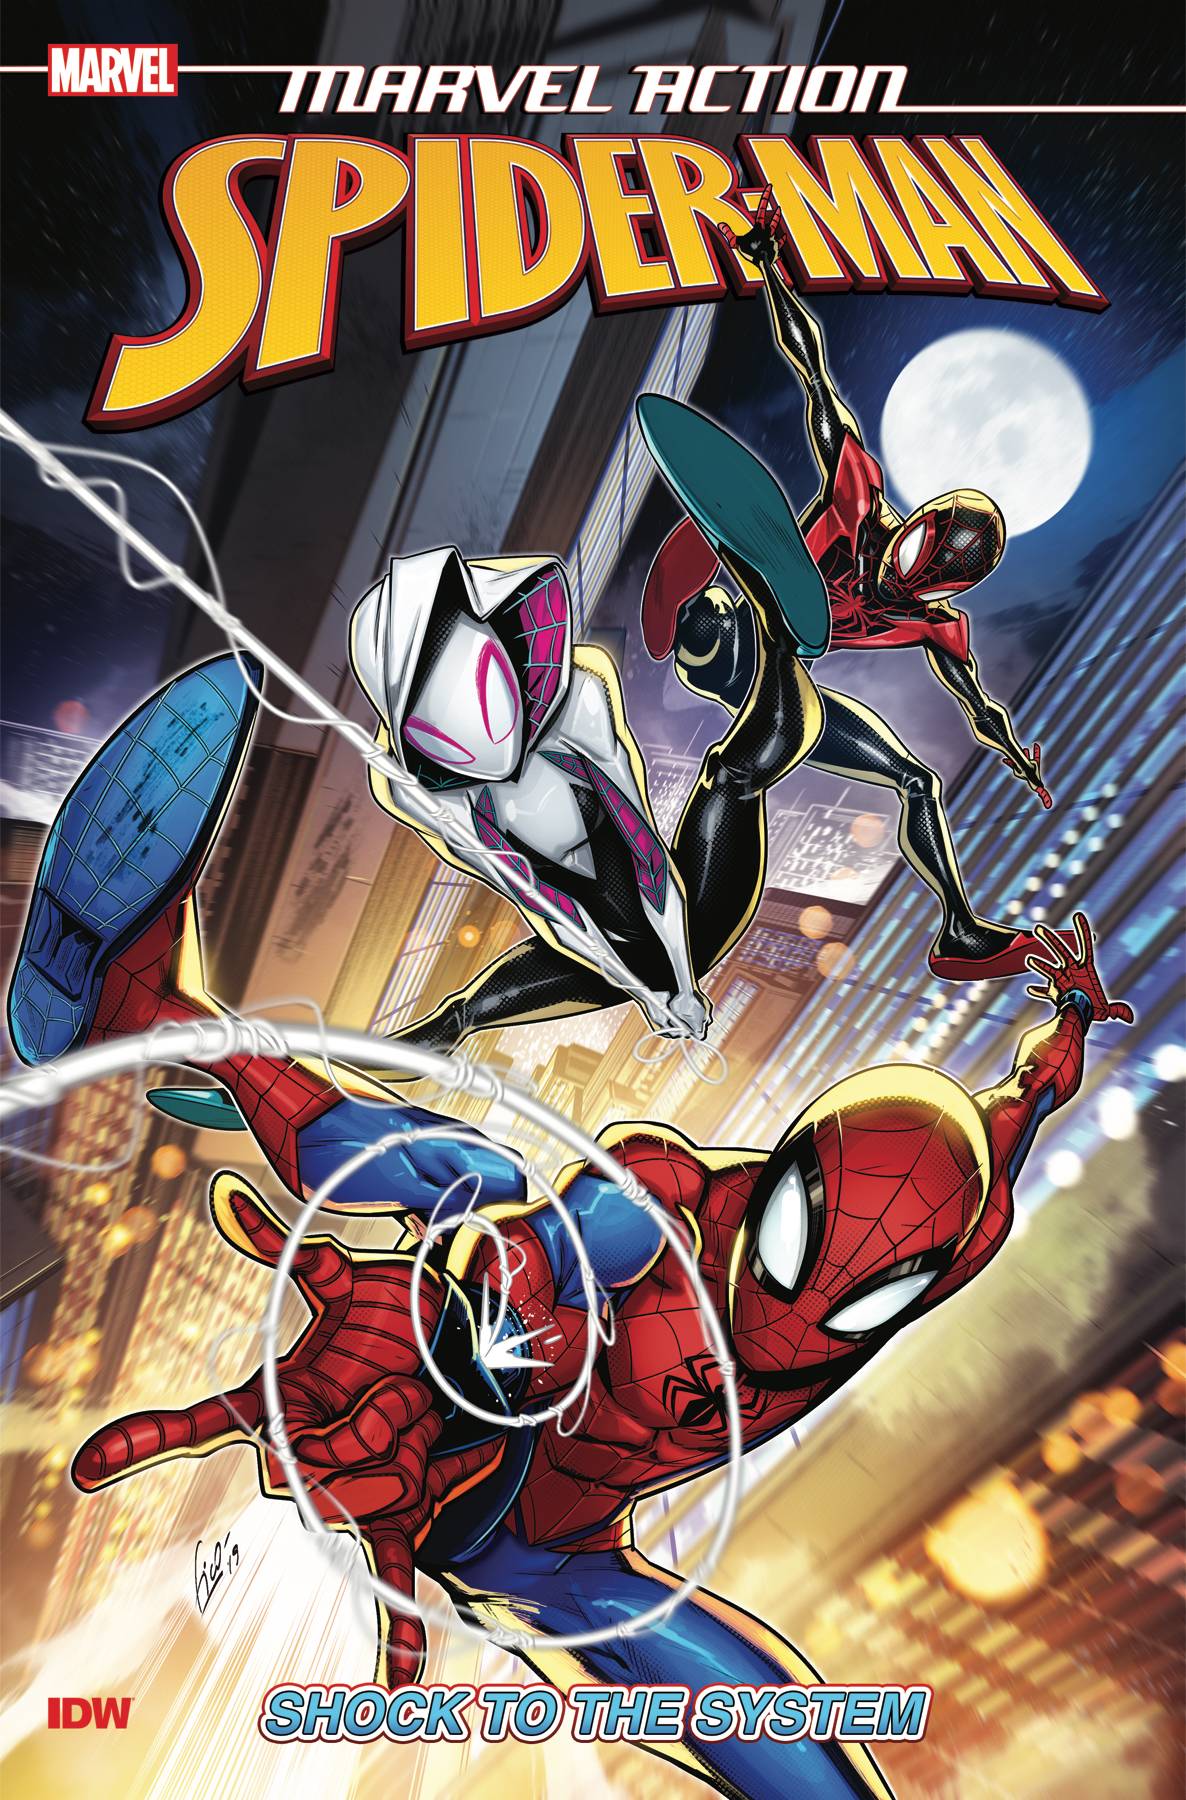 MARVEL ACTION SPIDER-MAN BOOK 05: SHOCK TO THE SYSTEM